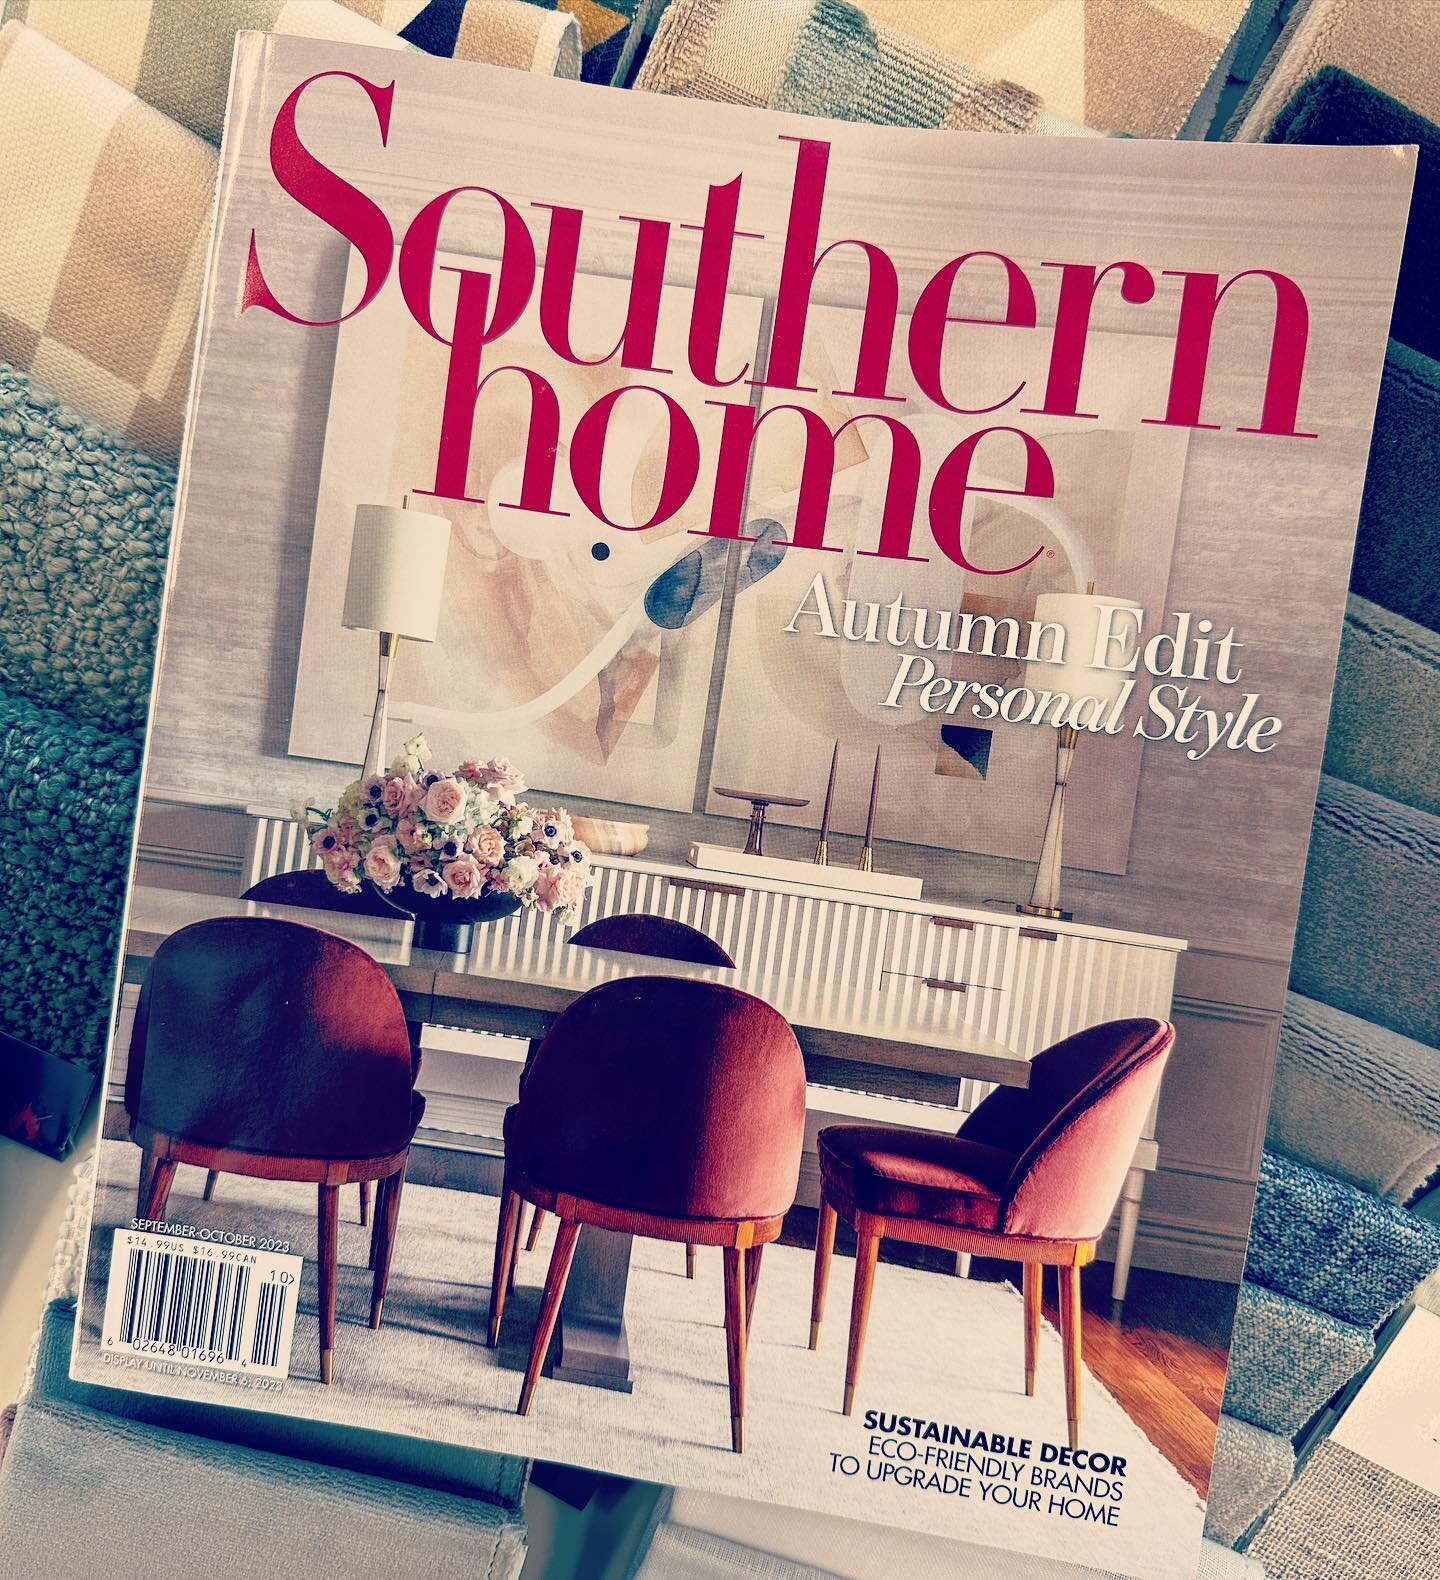 What an amazing surprise seeing our project on the cover of the current issue of Southern Home Magazine @southernhomemag !! So thrilled and honored! Thank you to their team and ours for putting this together!! 

📷 @rettpeek 
📝 @tiffbadams 
💐 @sara